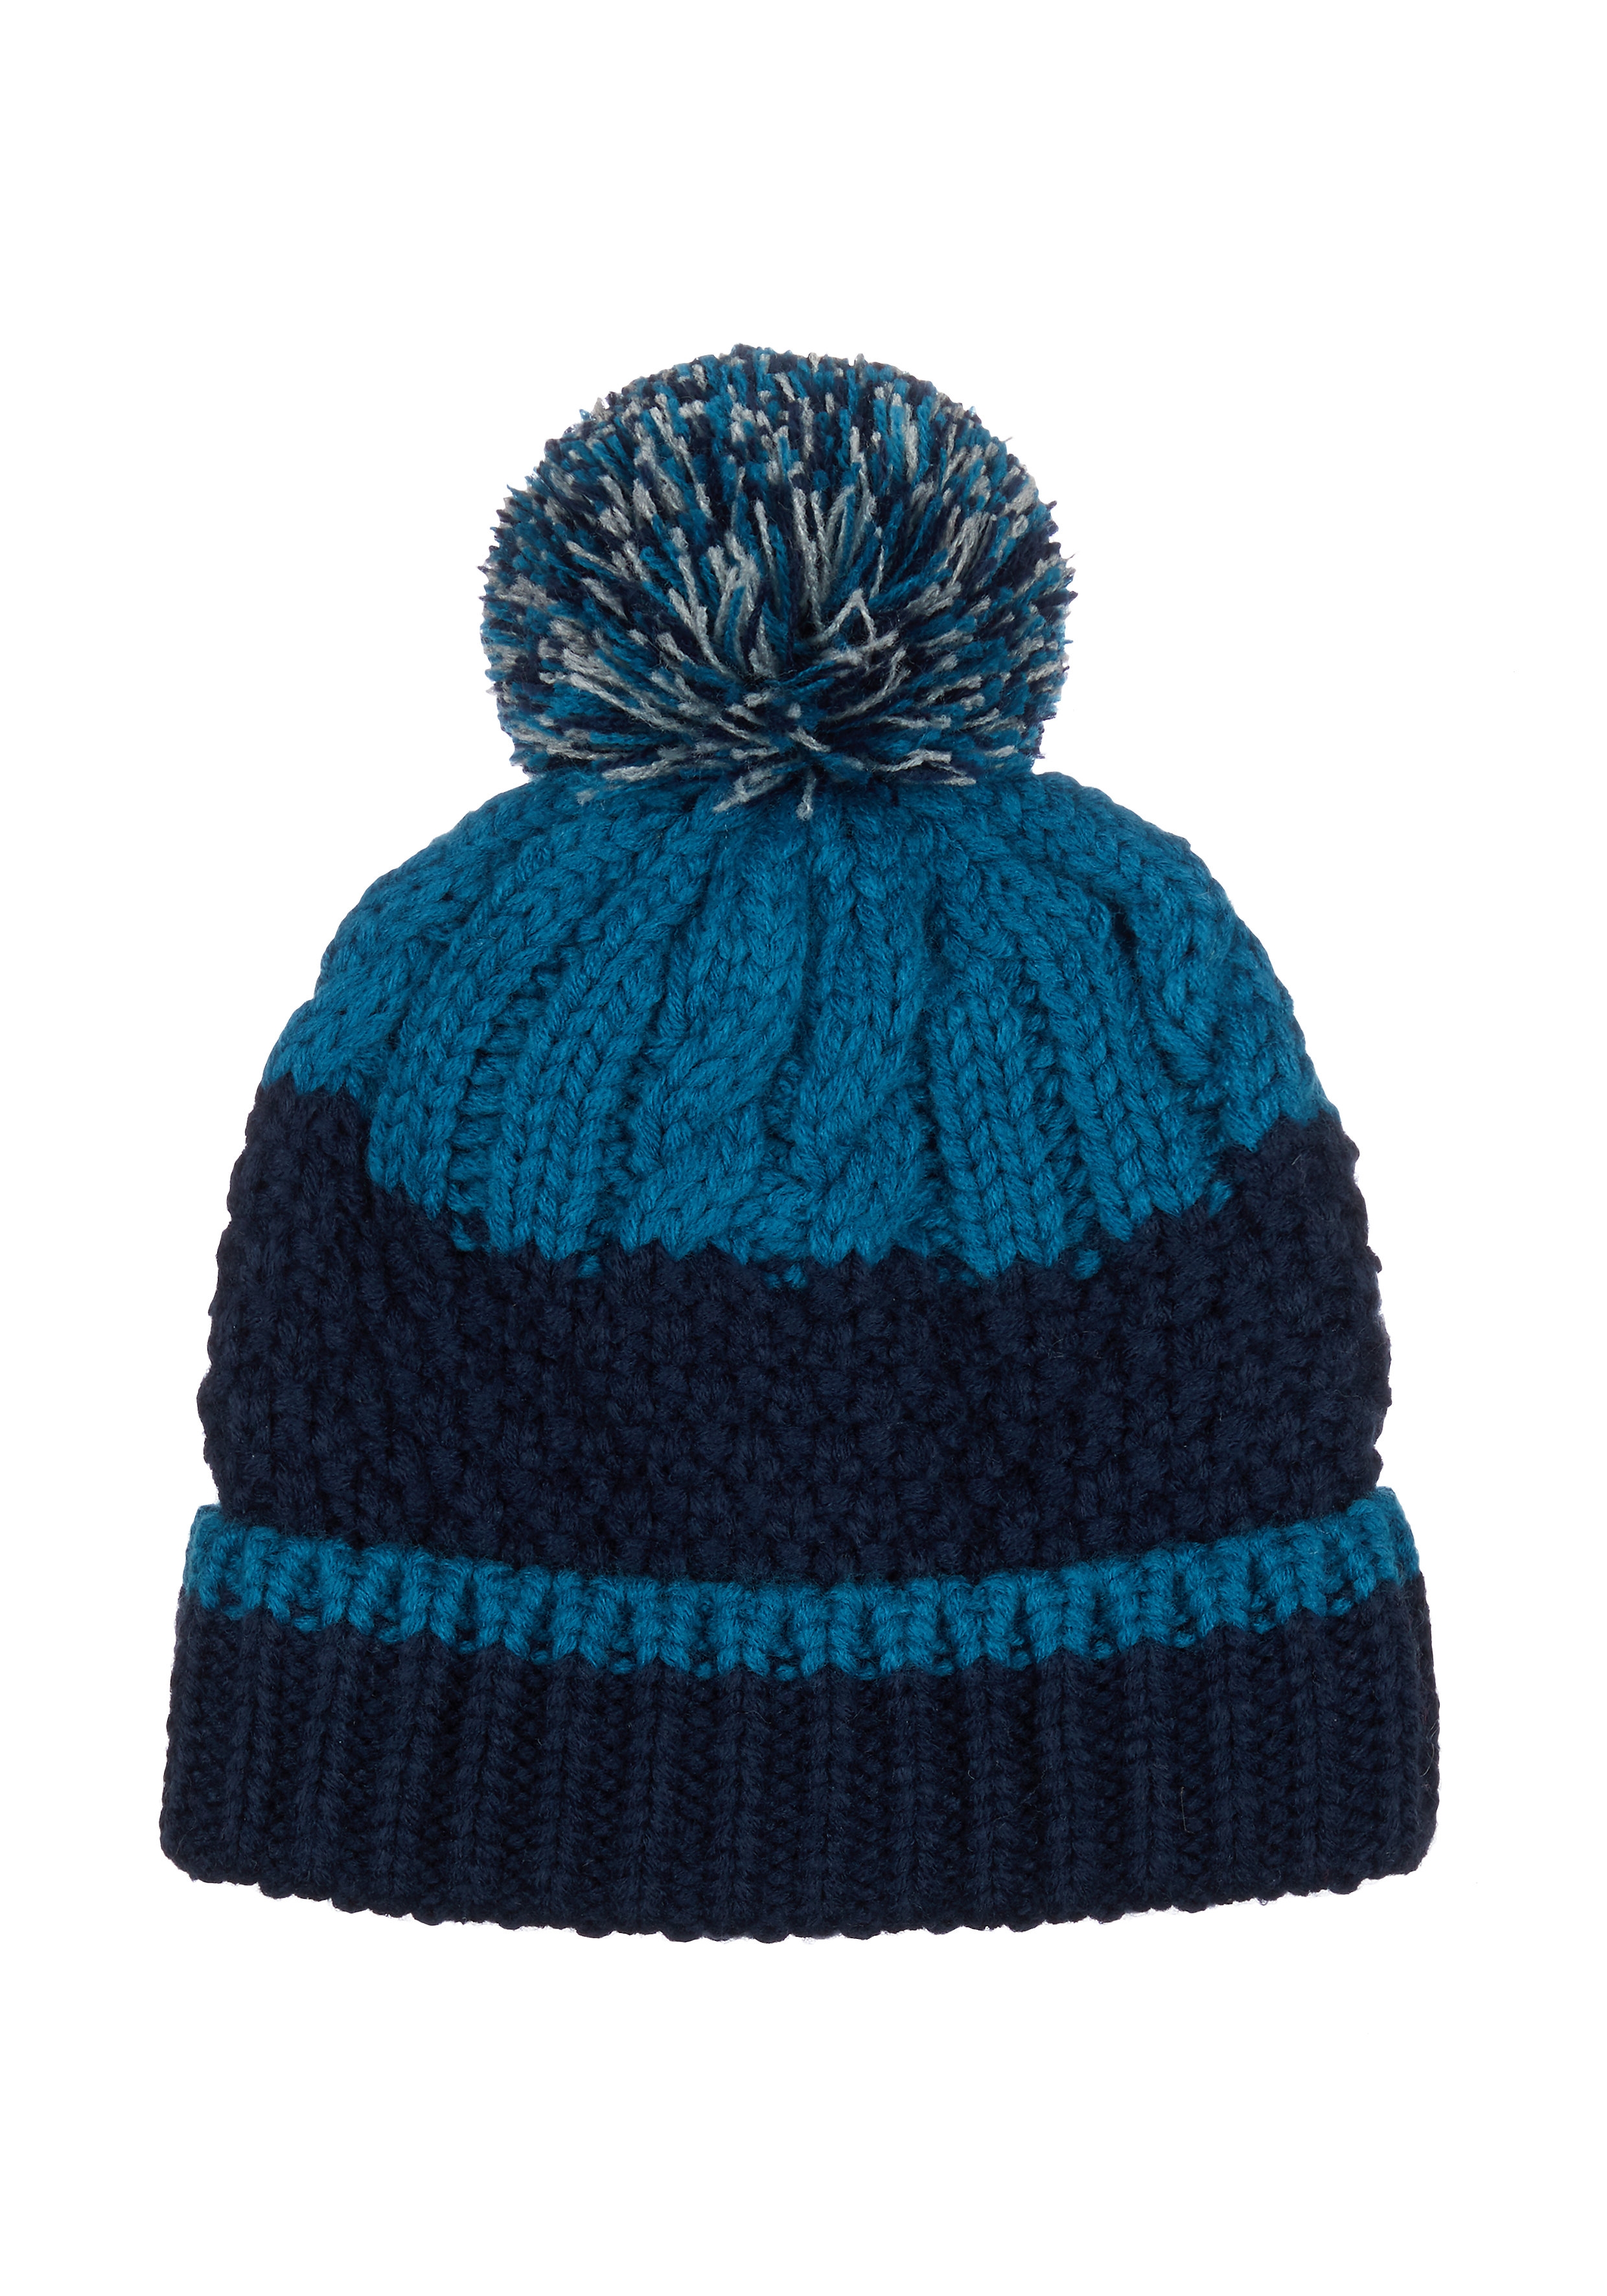 Mothercare | Boys Teal And Navy Cable - Knit Beanie Hat - Teal